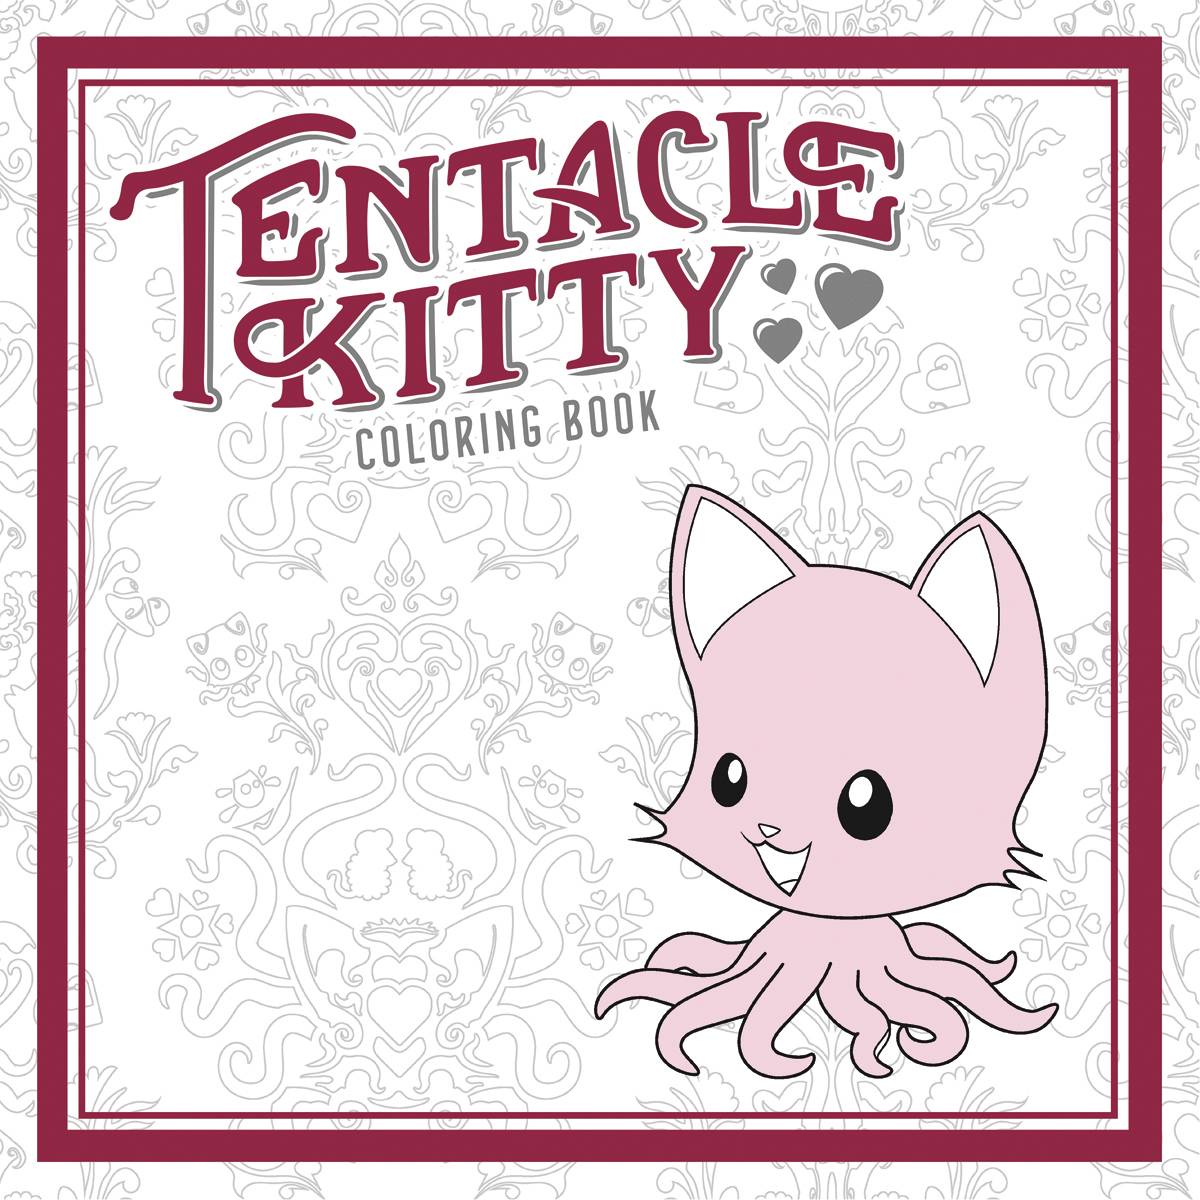 Tentacle Kitty Coloring Book Soft Cover